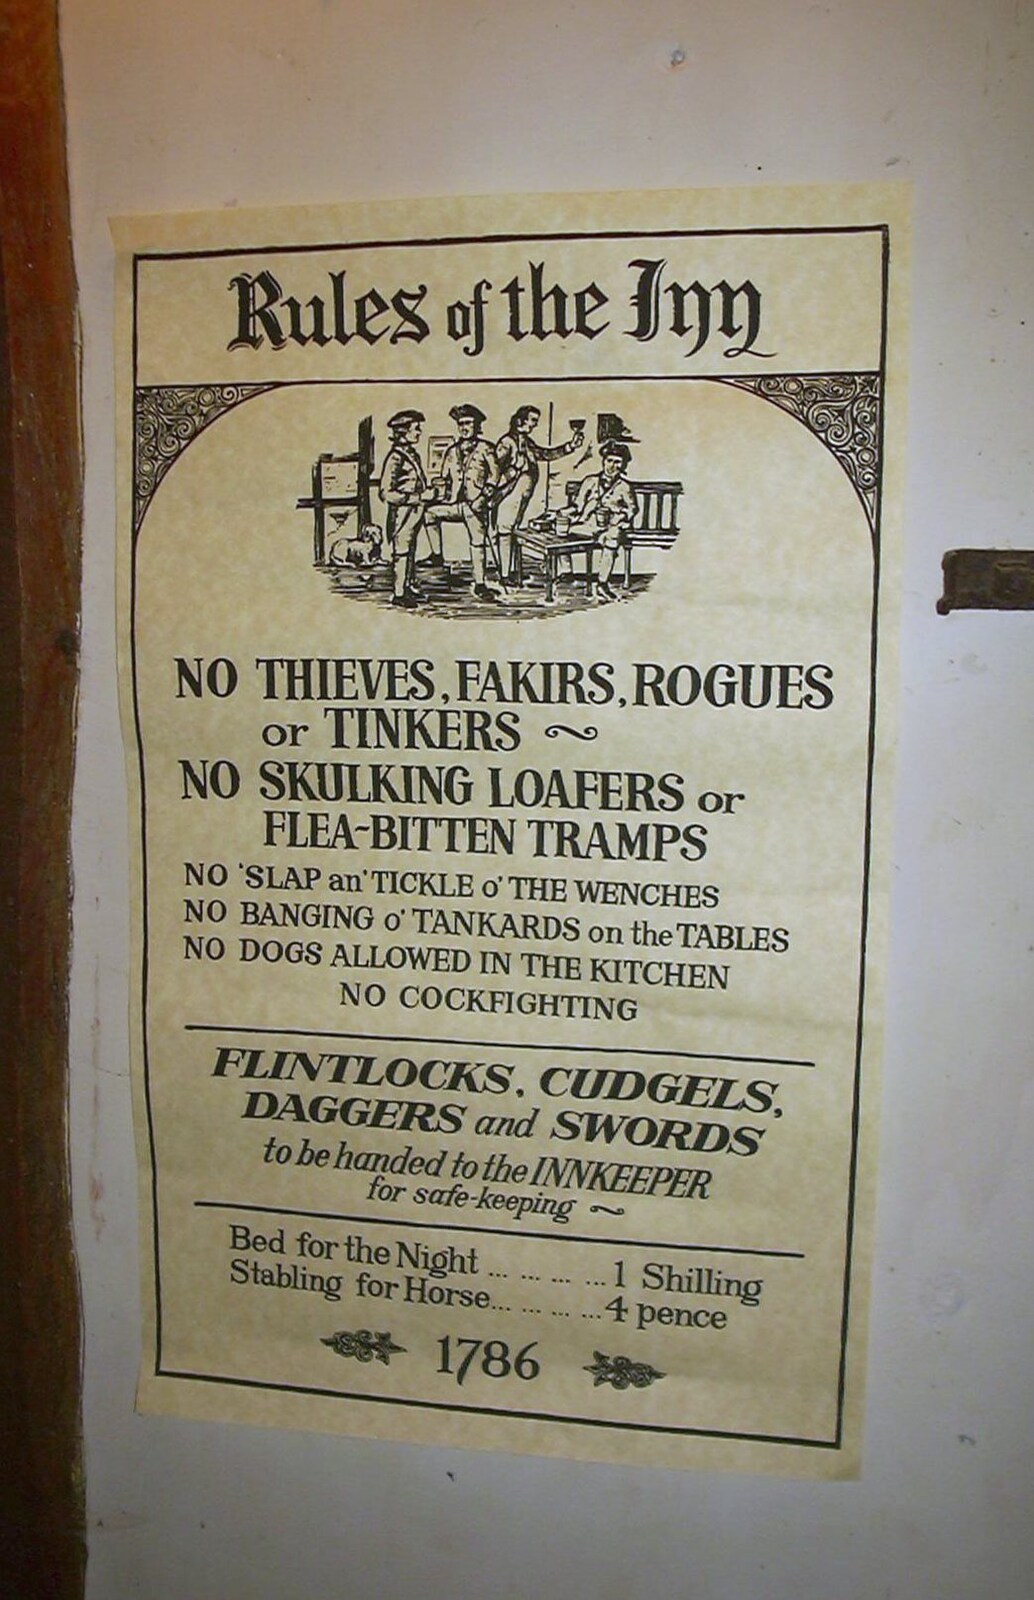 The rules of the pub, 1786 style from A BSCC Splinter Group Camping Trip, Shottisham, Suffolk - 13th August 2004